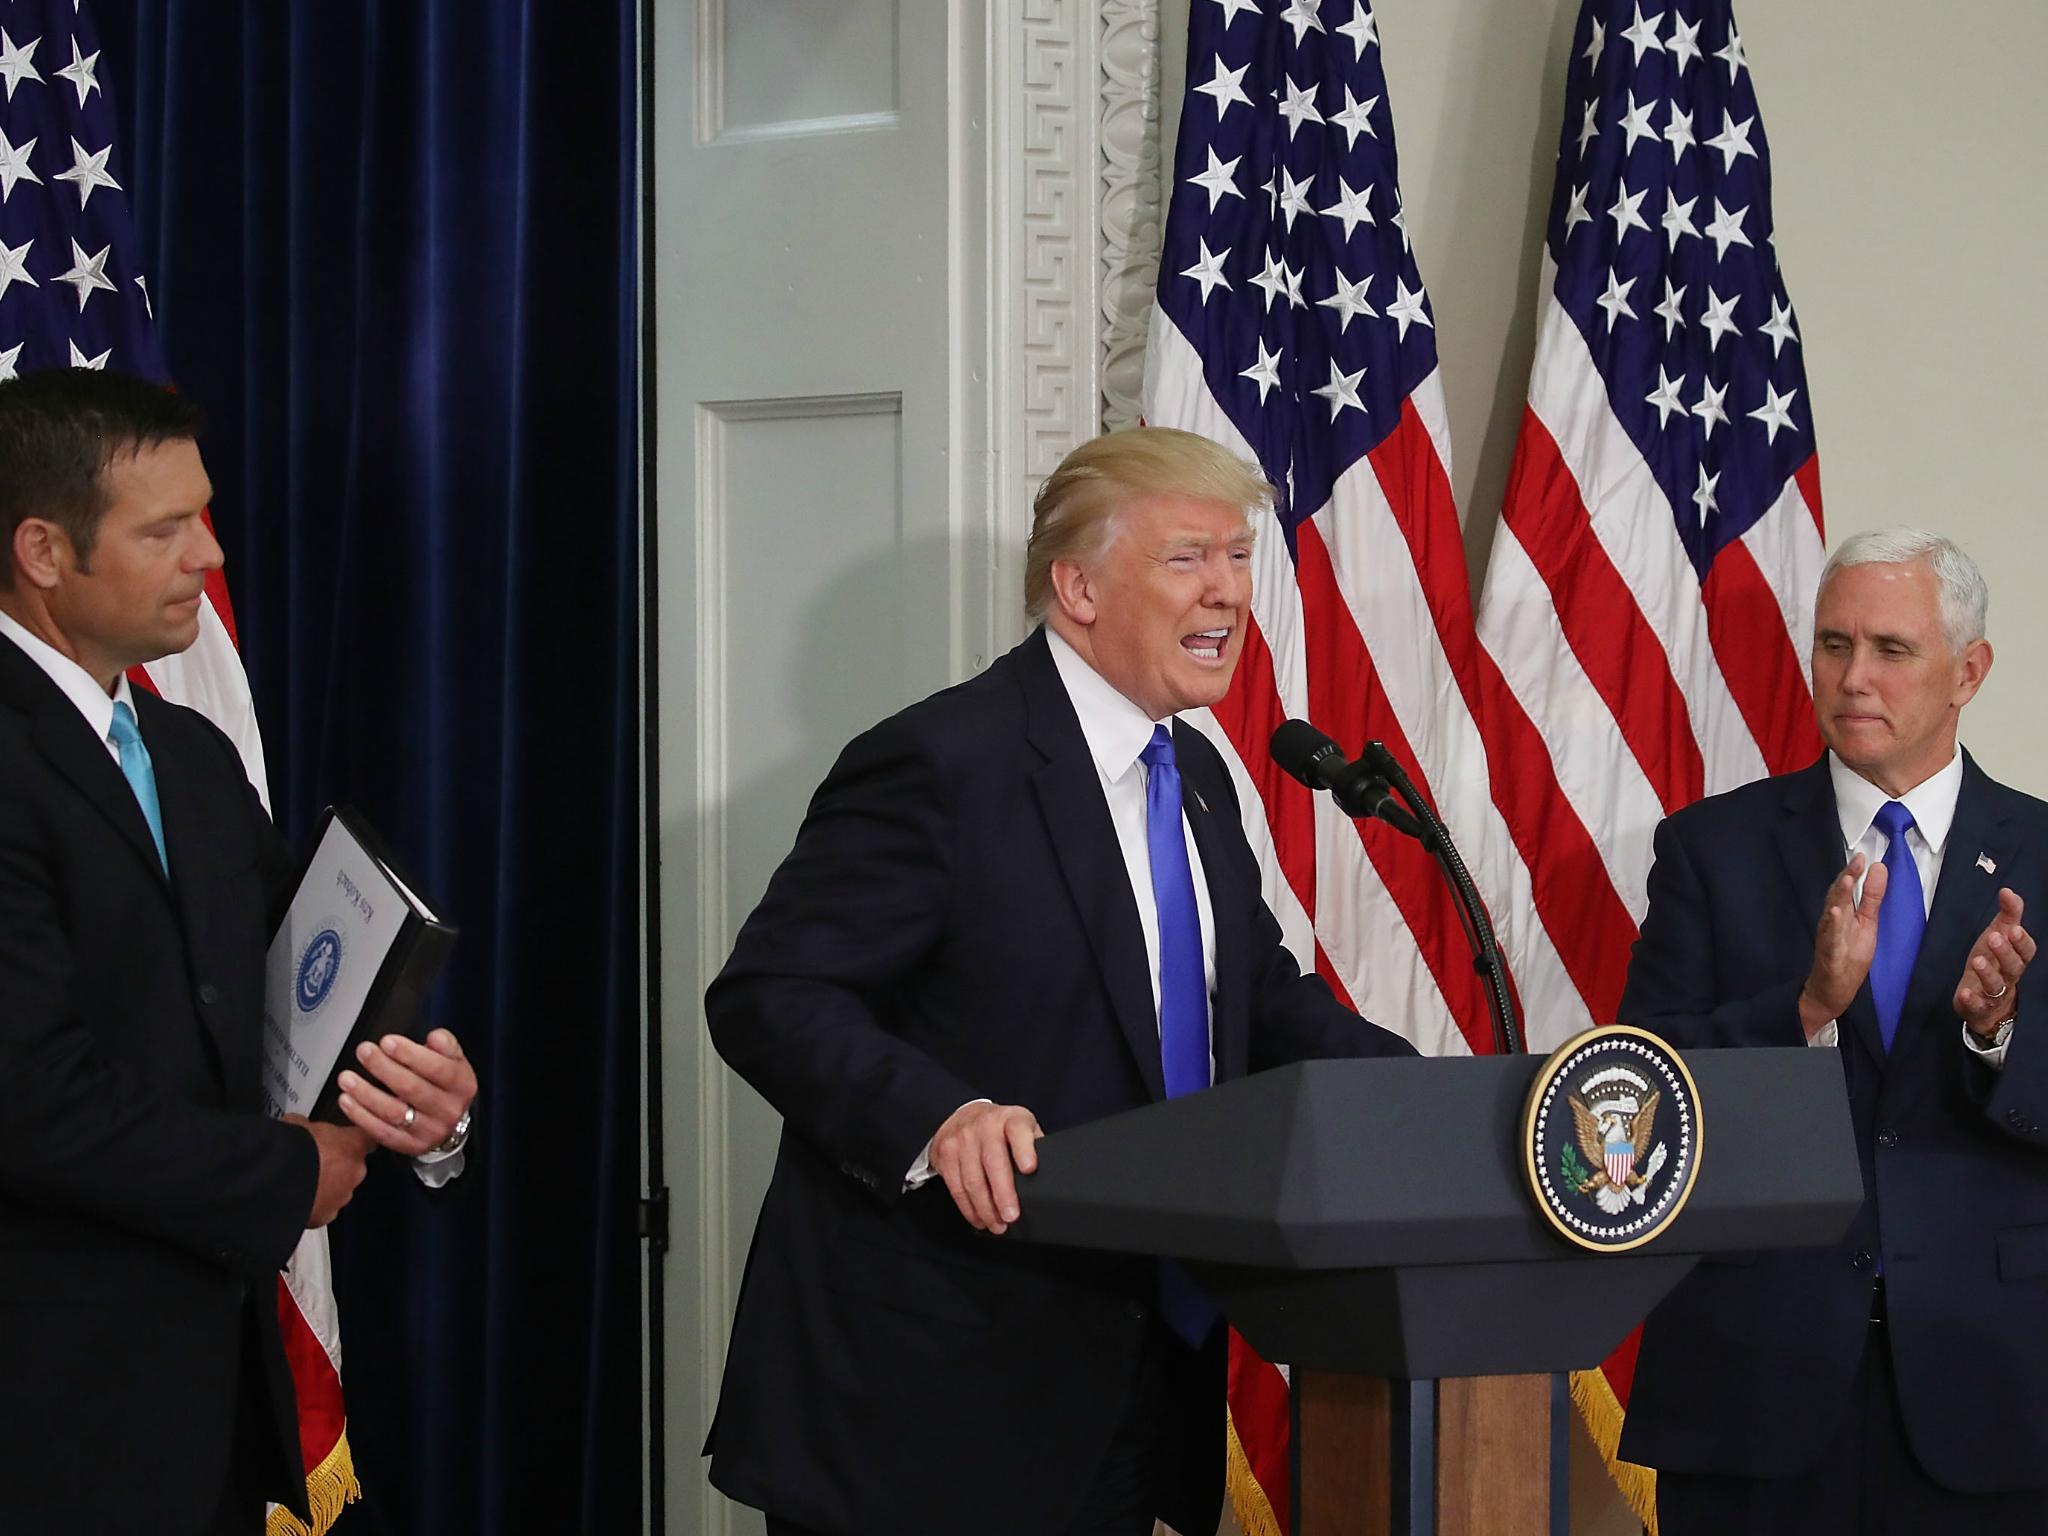 Donald Trump speaks while flanked by Kansas Secretary of State, Kris Kobach and US Vice President Mike Pence during the first meeting of the Presidential Advisory Commission on Election Integrity on 19 July 2017